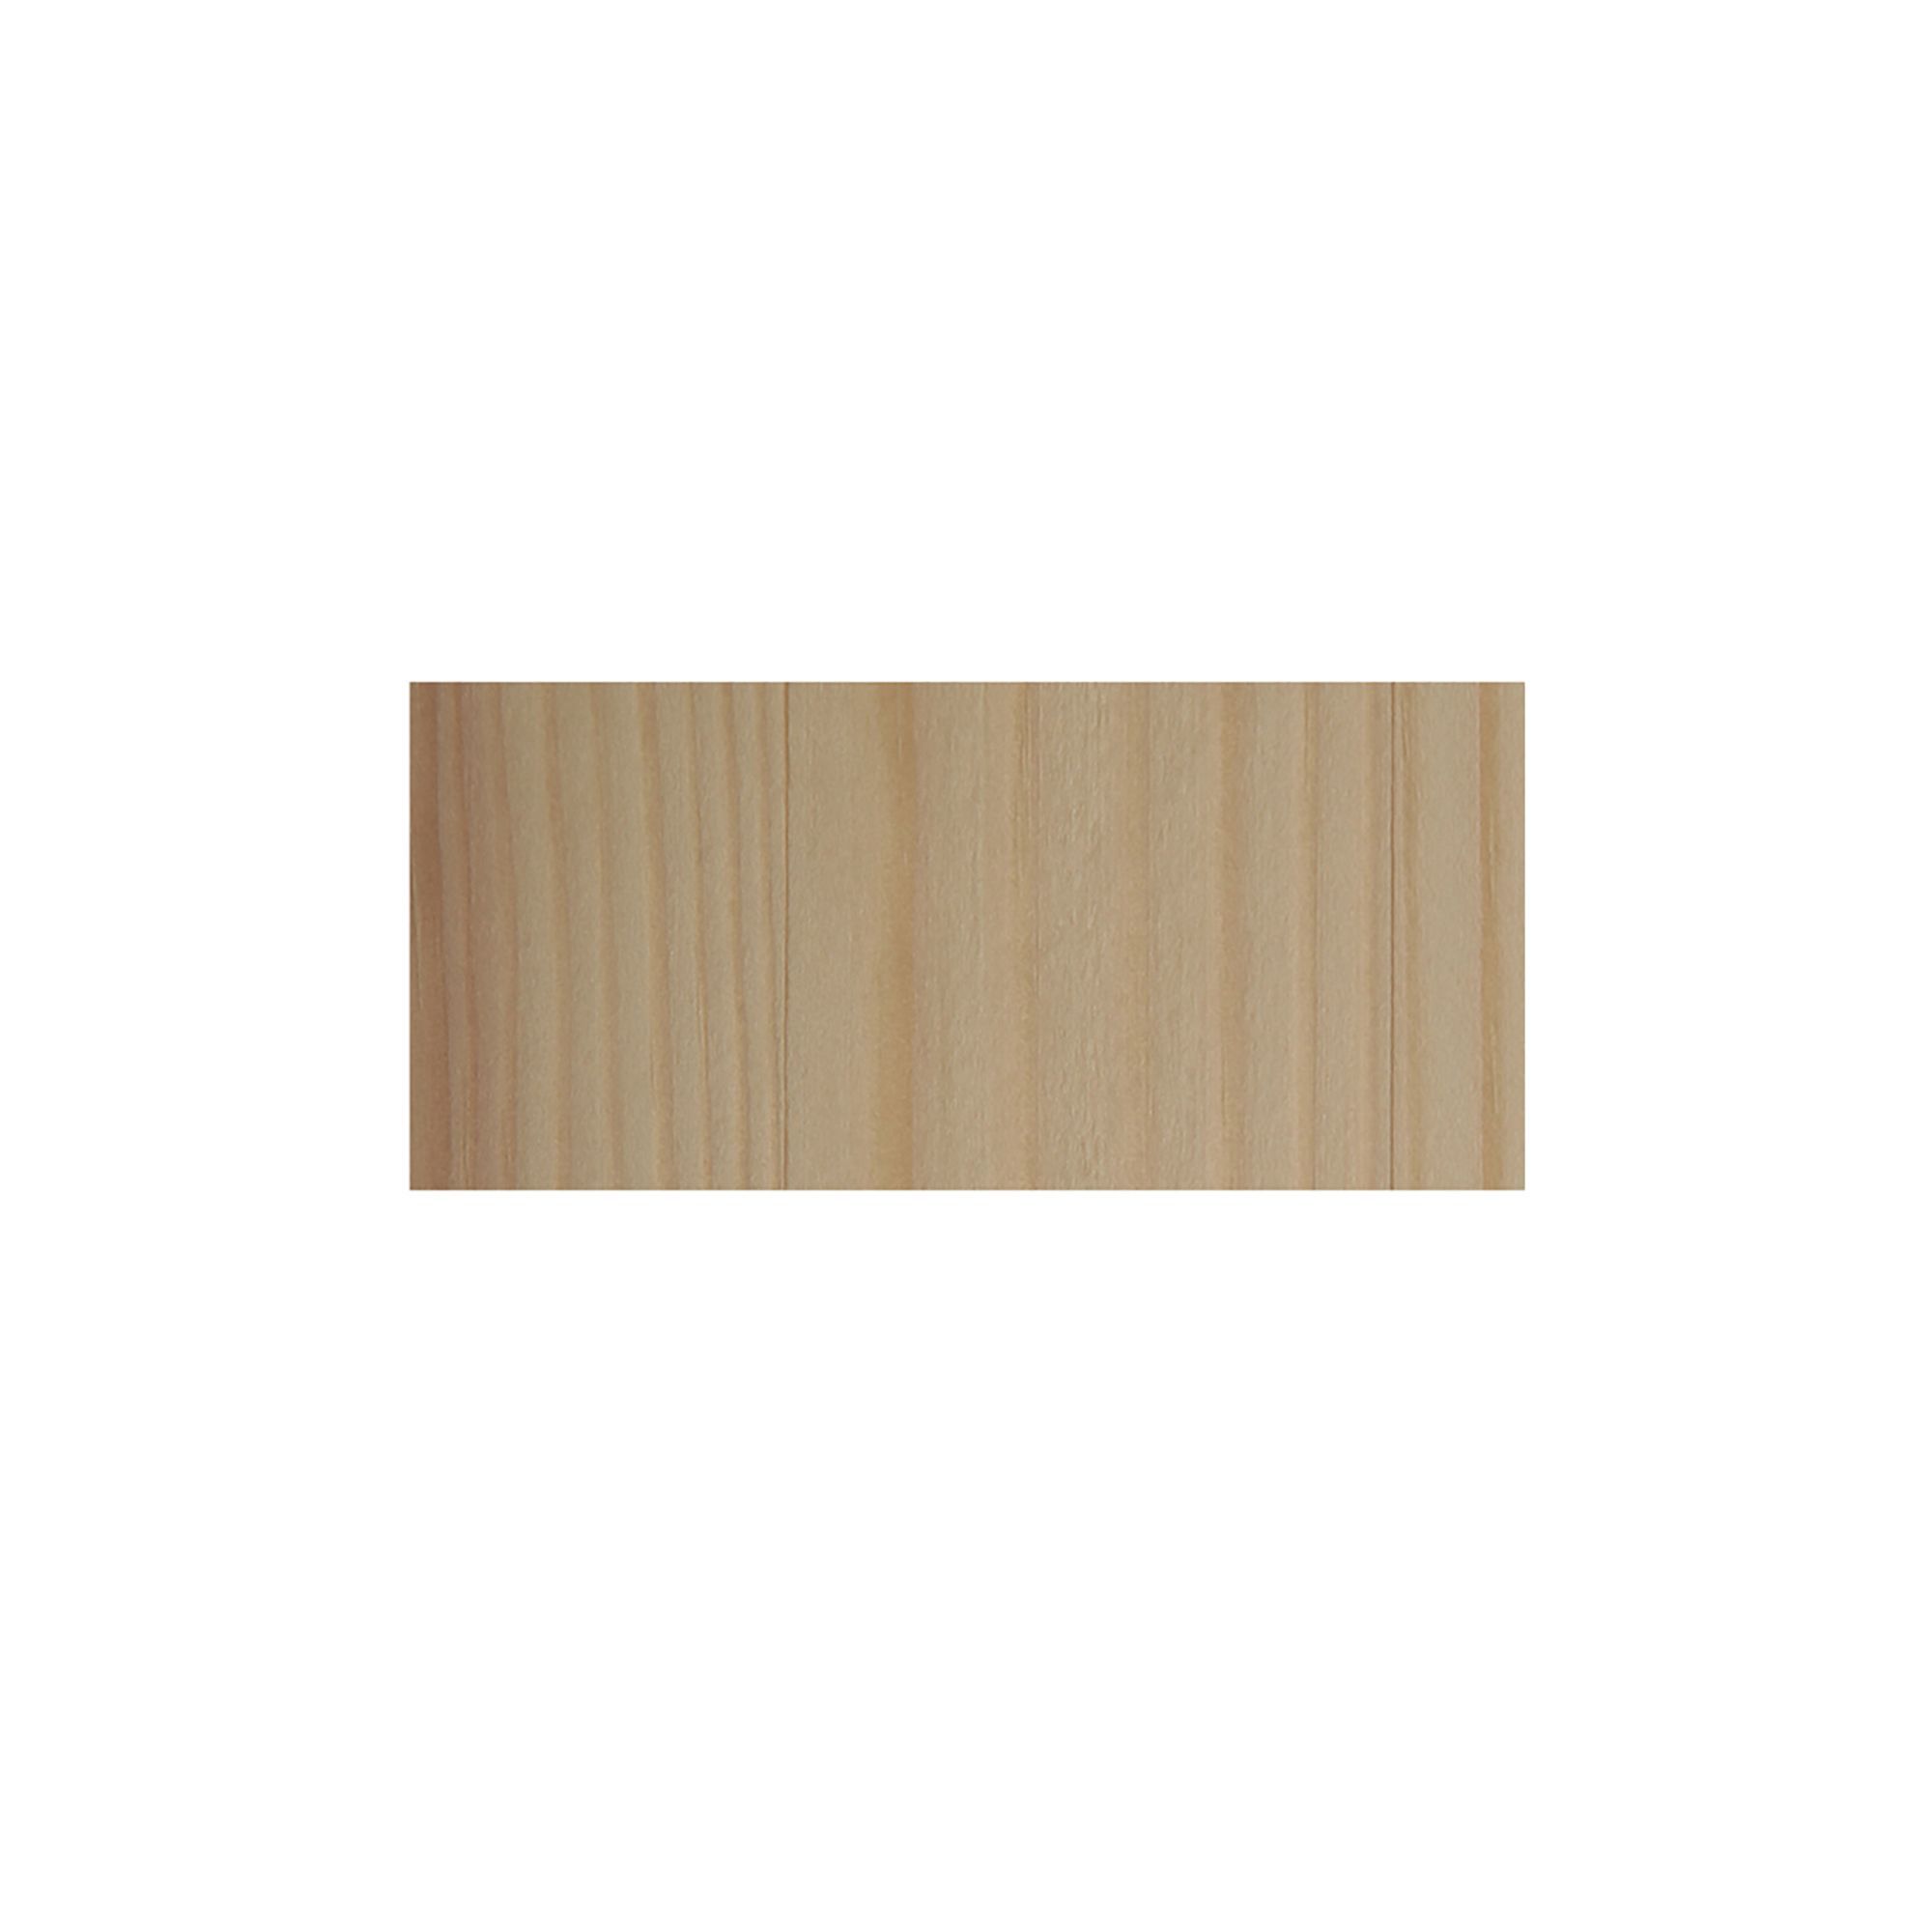 Cheshire Mouldings Smooth Planed Square edge Pine Stripwood (L)0.9m (W)68mm (T)15mm STPN54